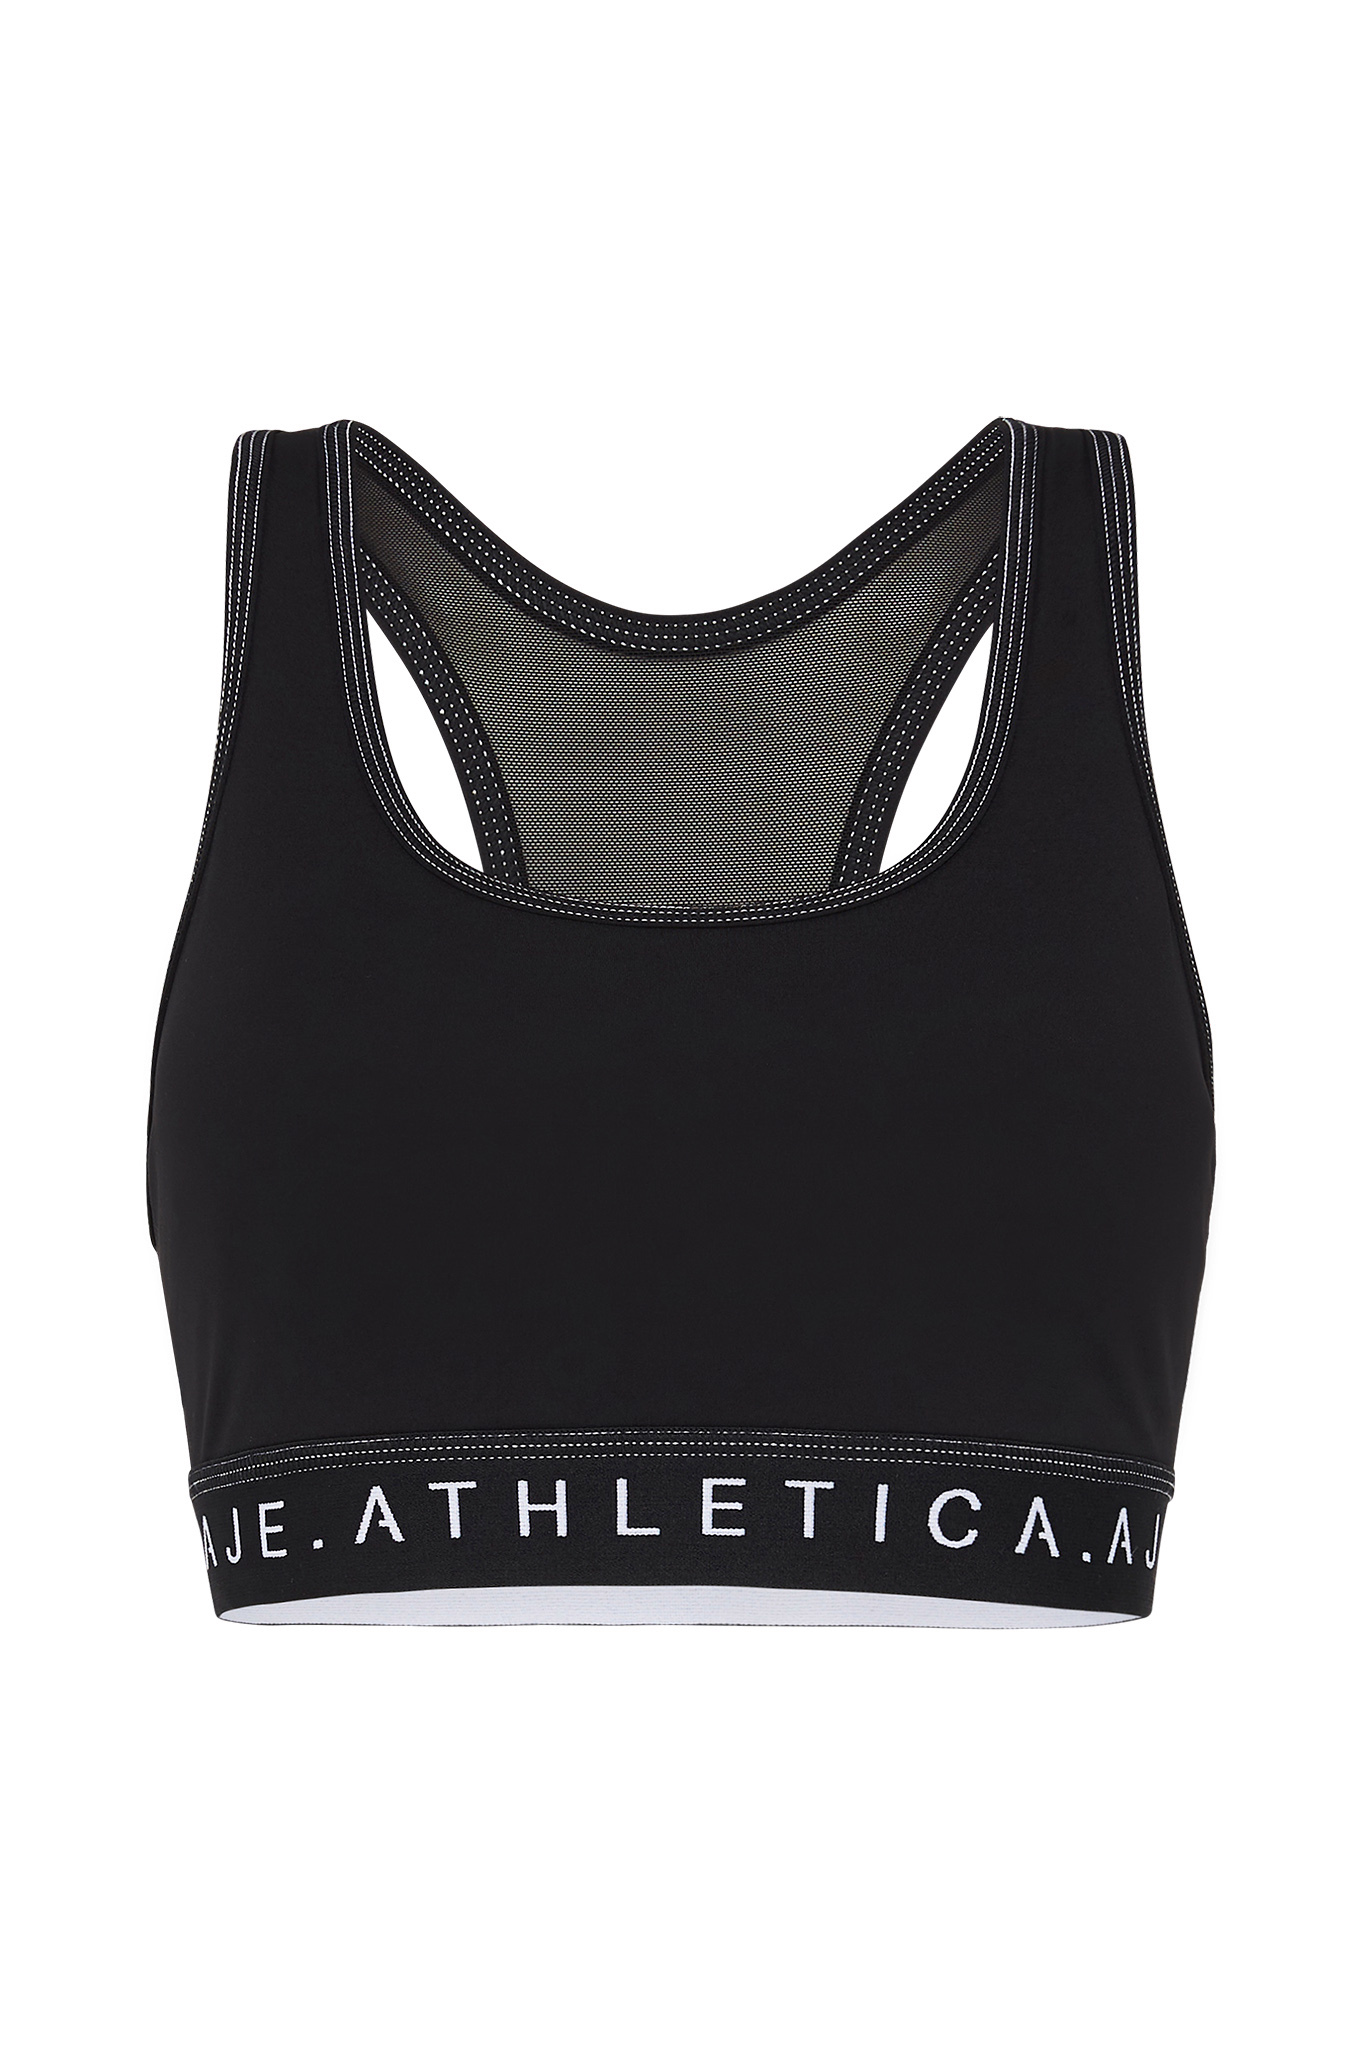 Aje Athletica Is Here To Elevate Your Activewear - Grazia USA